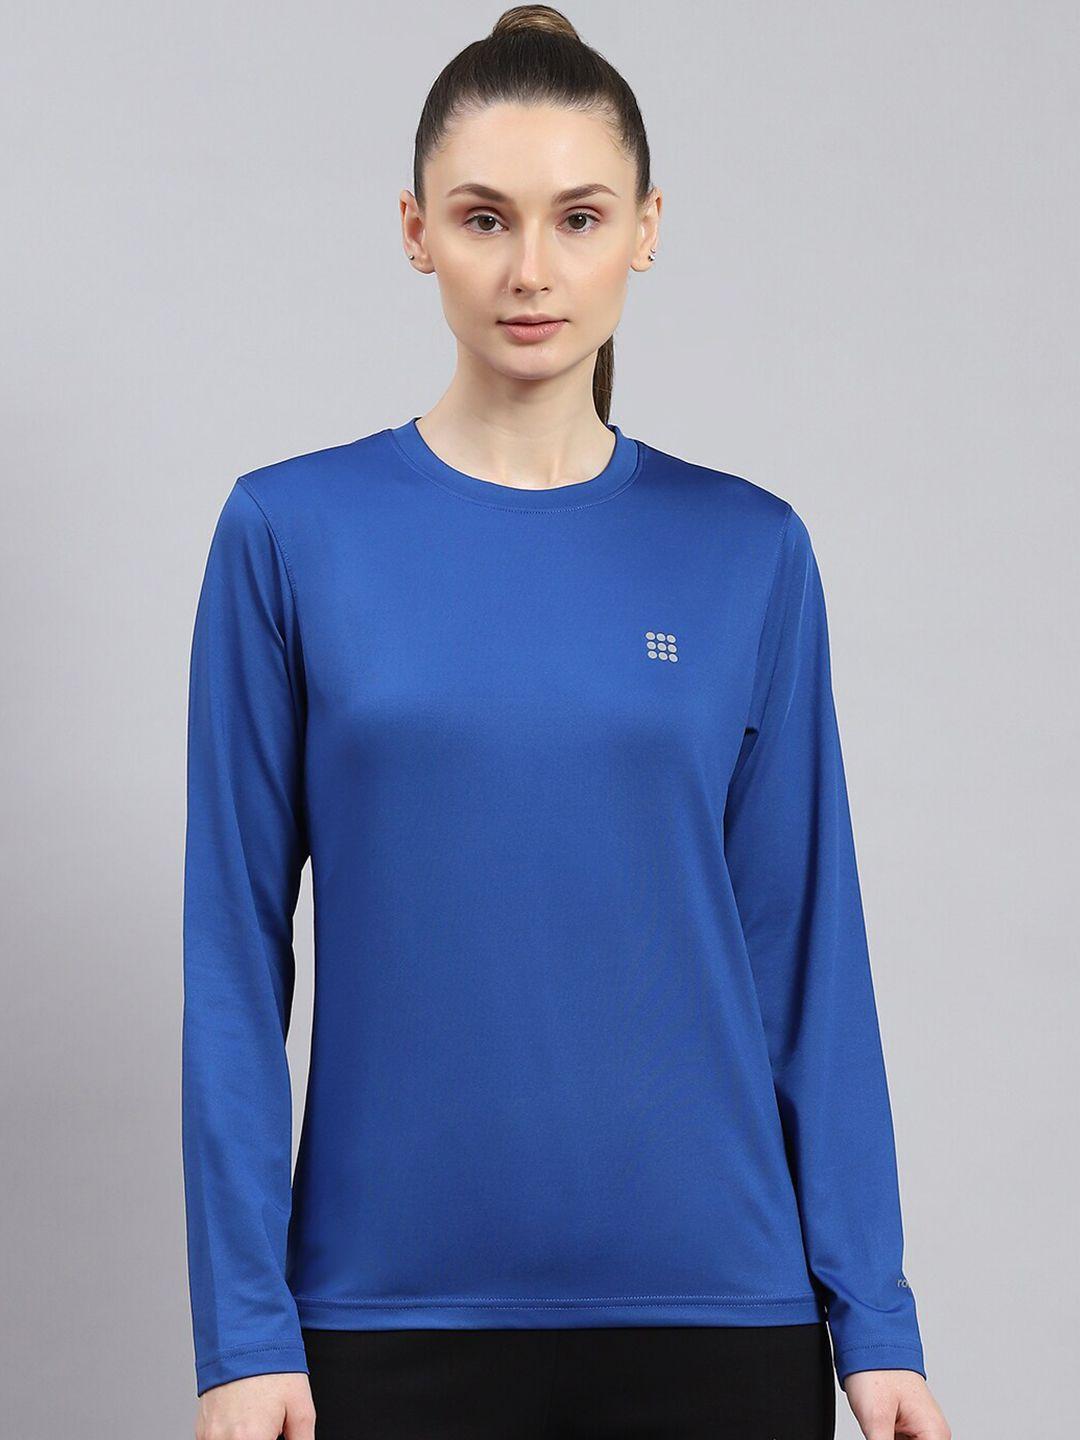 rock.it round neck long sleeves sports t-shirt